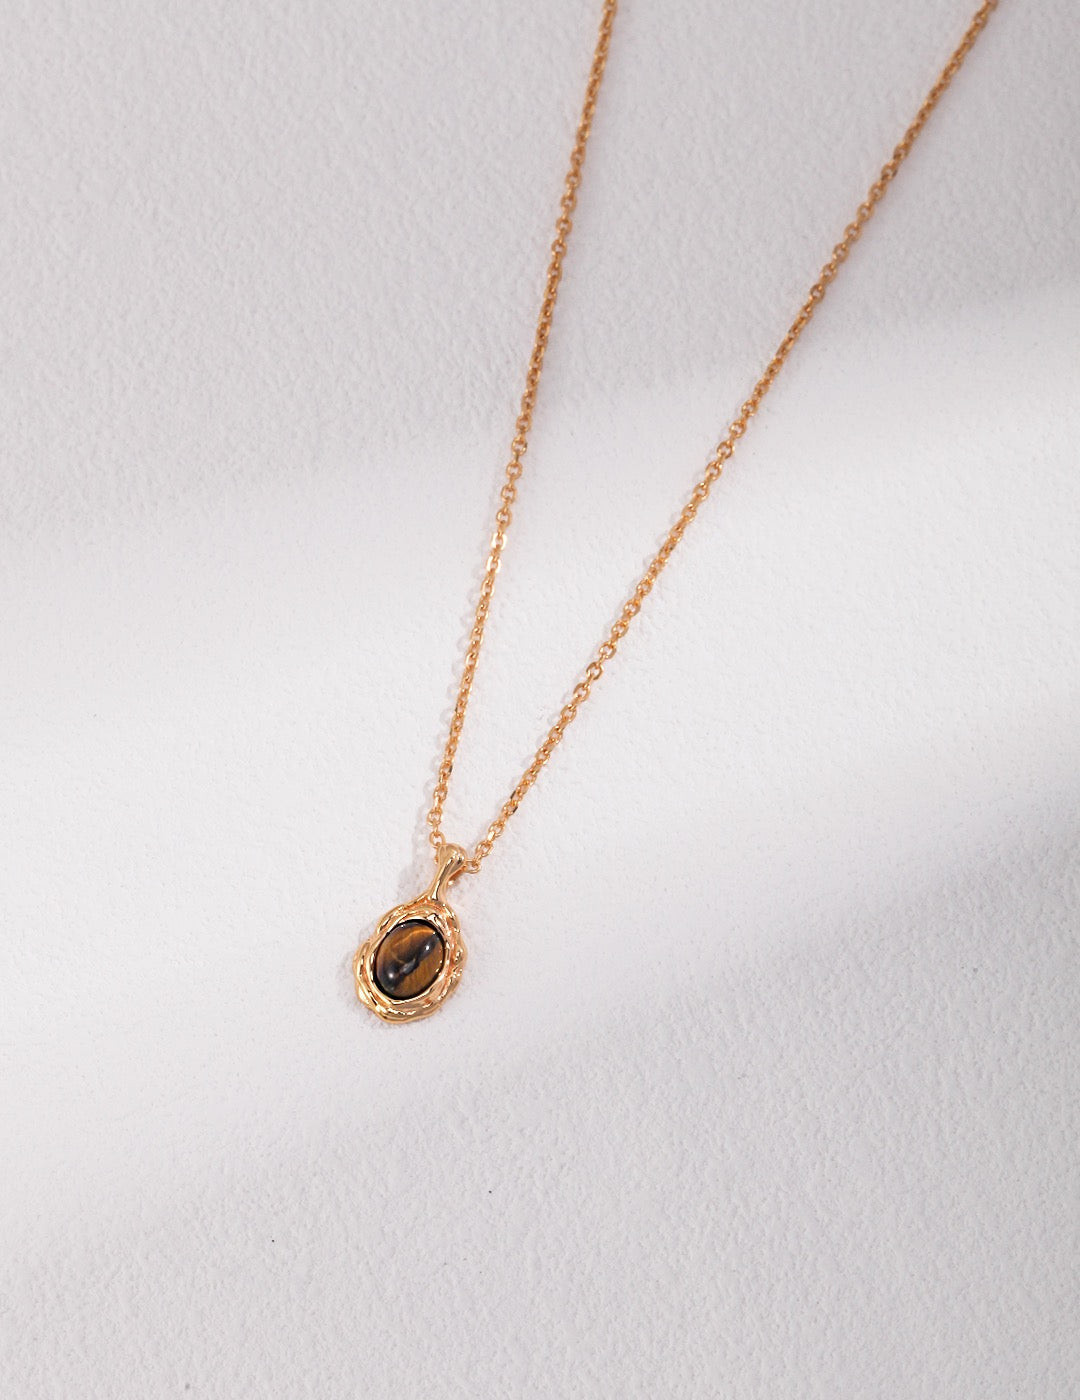 Tiger's Eye Pendant Necklace,Tiger's Eye Jewelry, Necklace For Women 